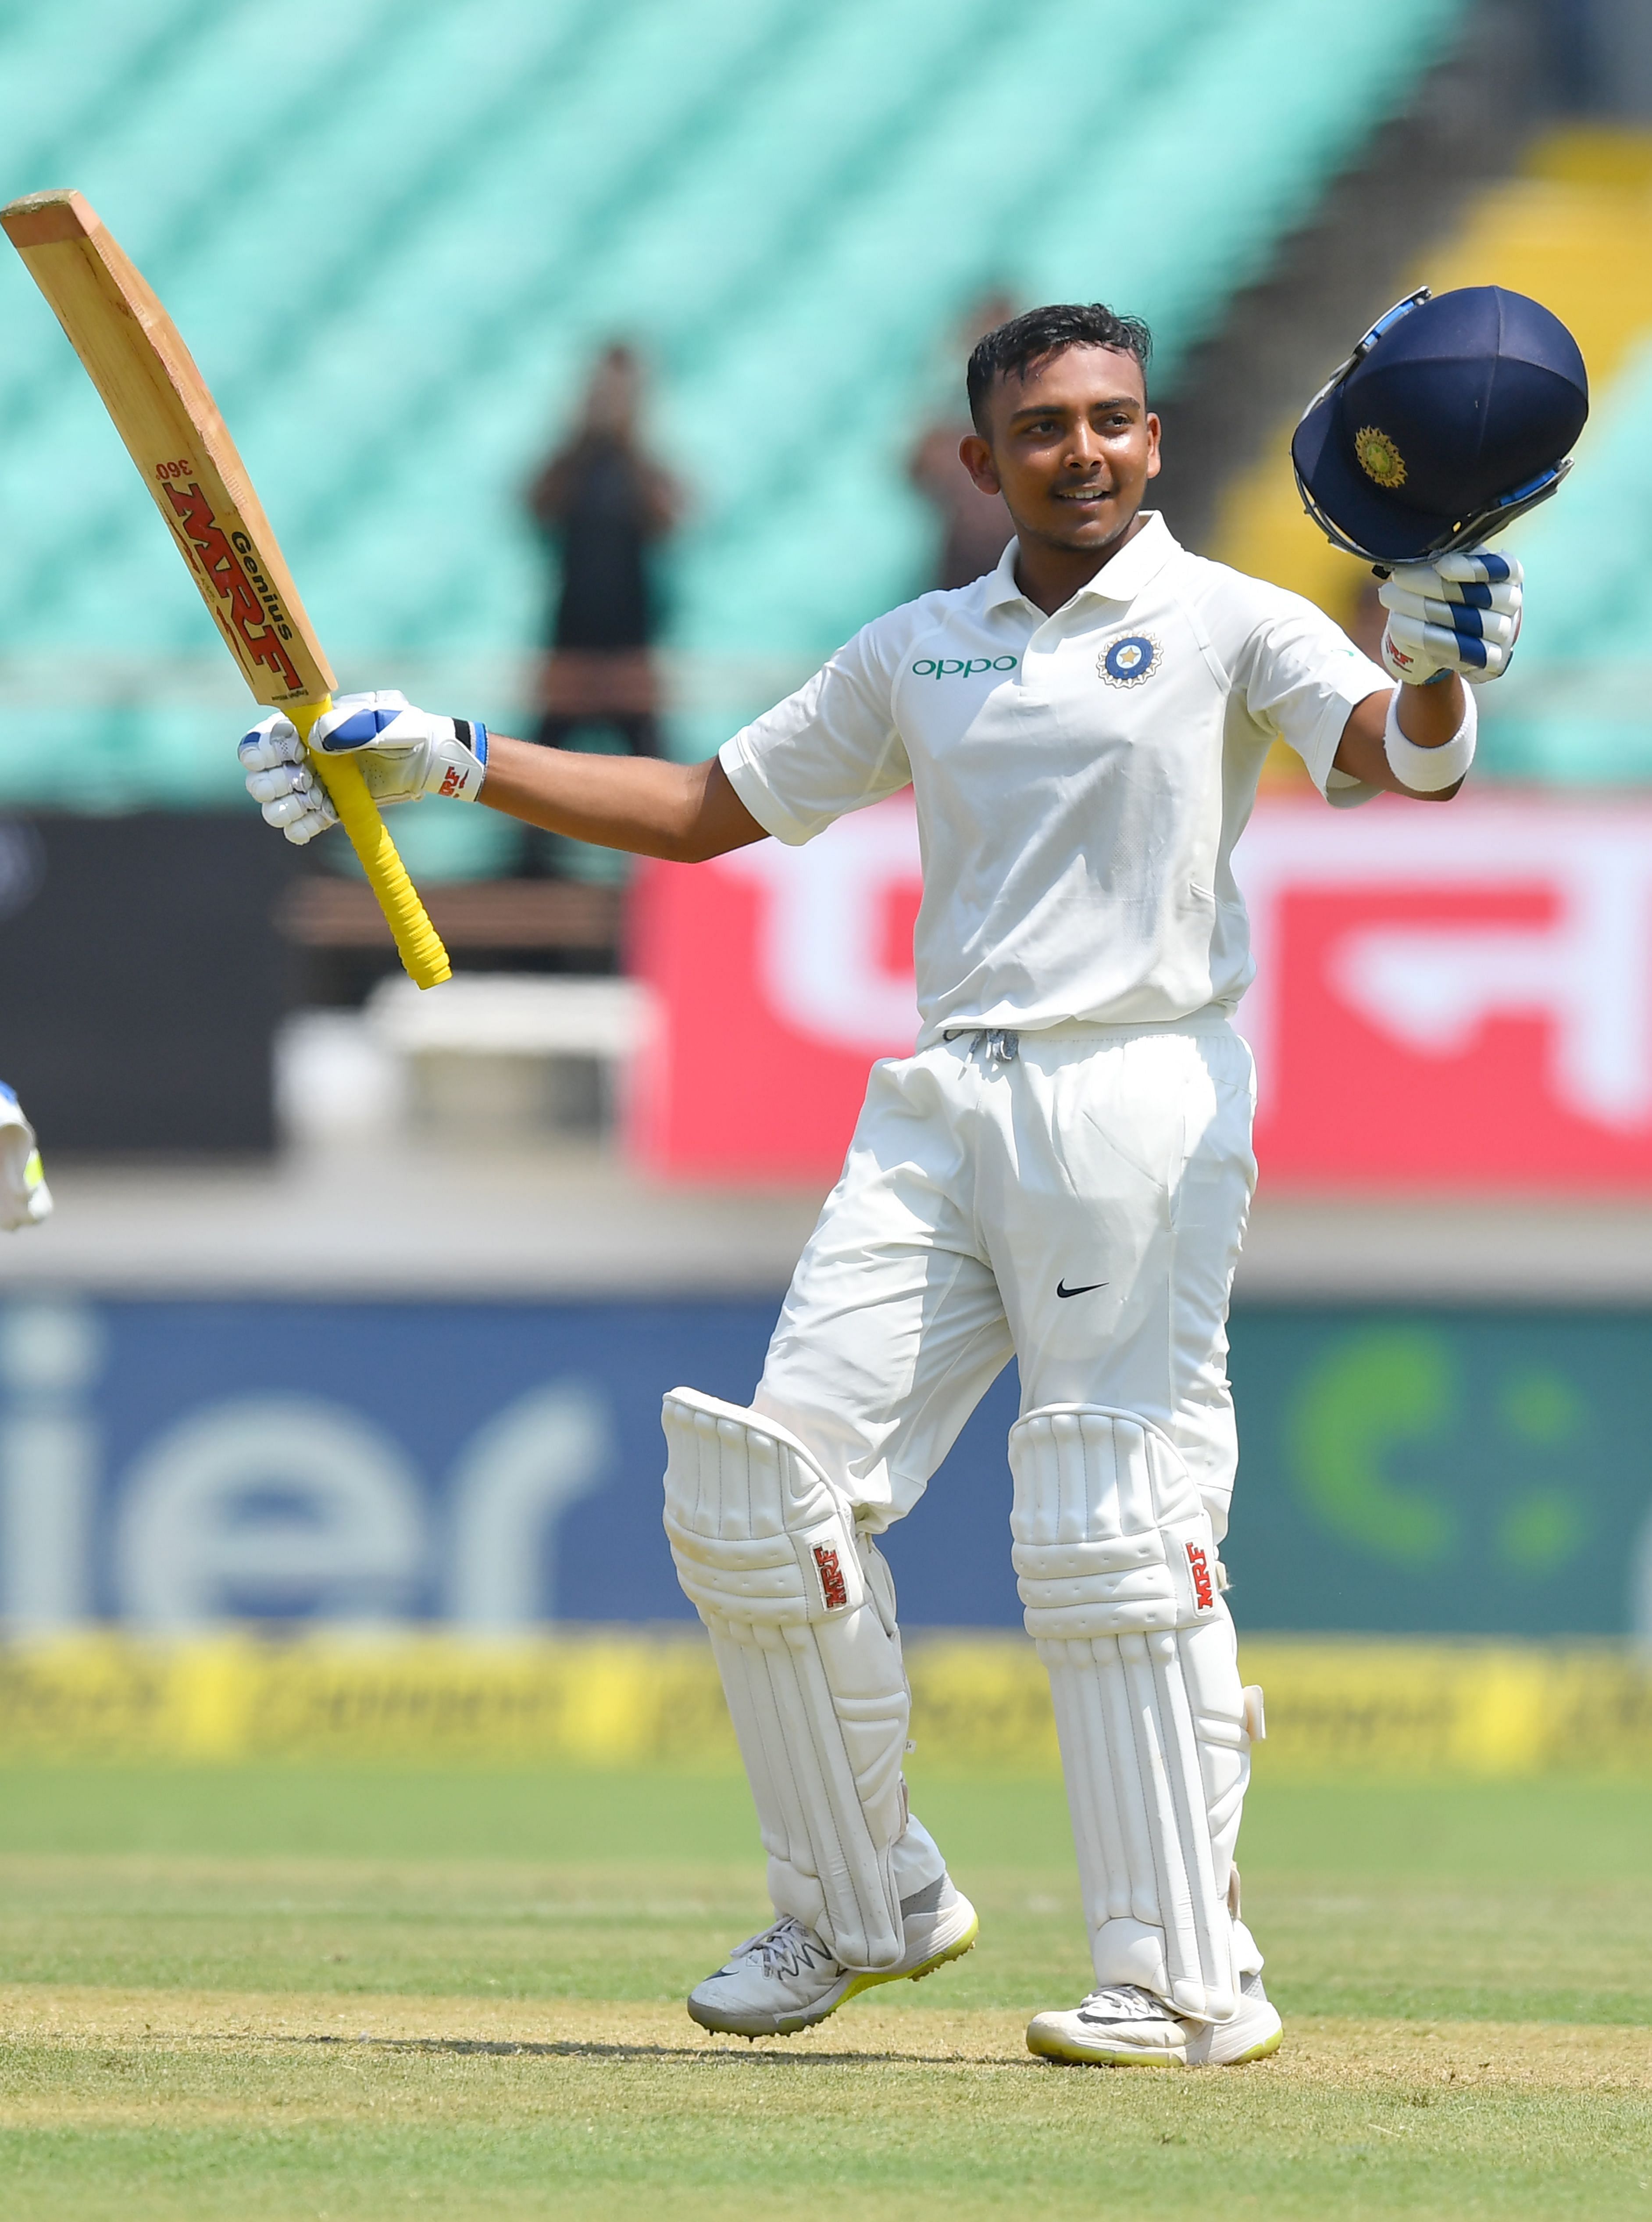 Prithvi Shaw celebrates after scoring a century during the first day of the first Test against West Indies in Rajkot on Thursday. AFP